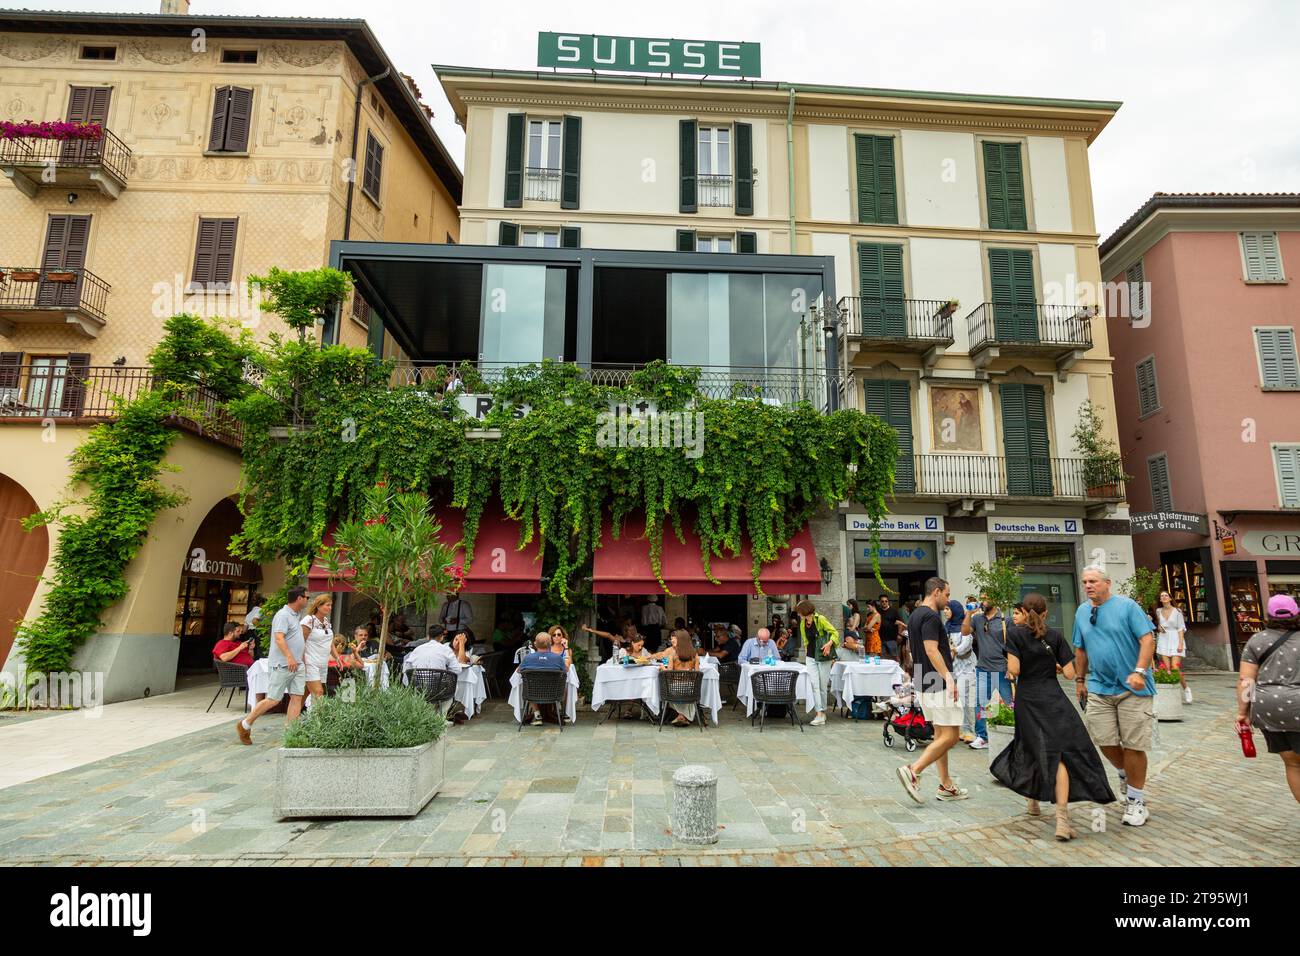 People eating al fresco at the Hotel Suisse in Bellagio, Lombardy, Italy. Stock Photo